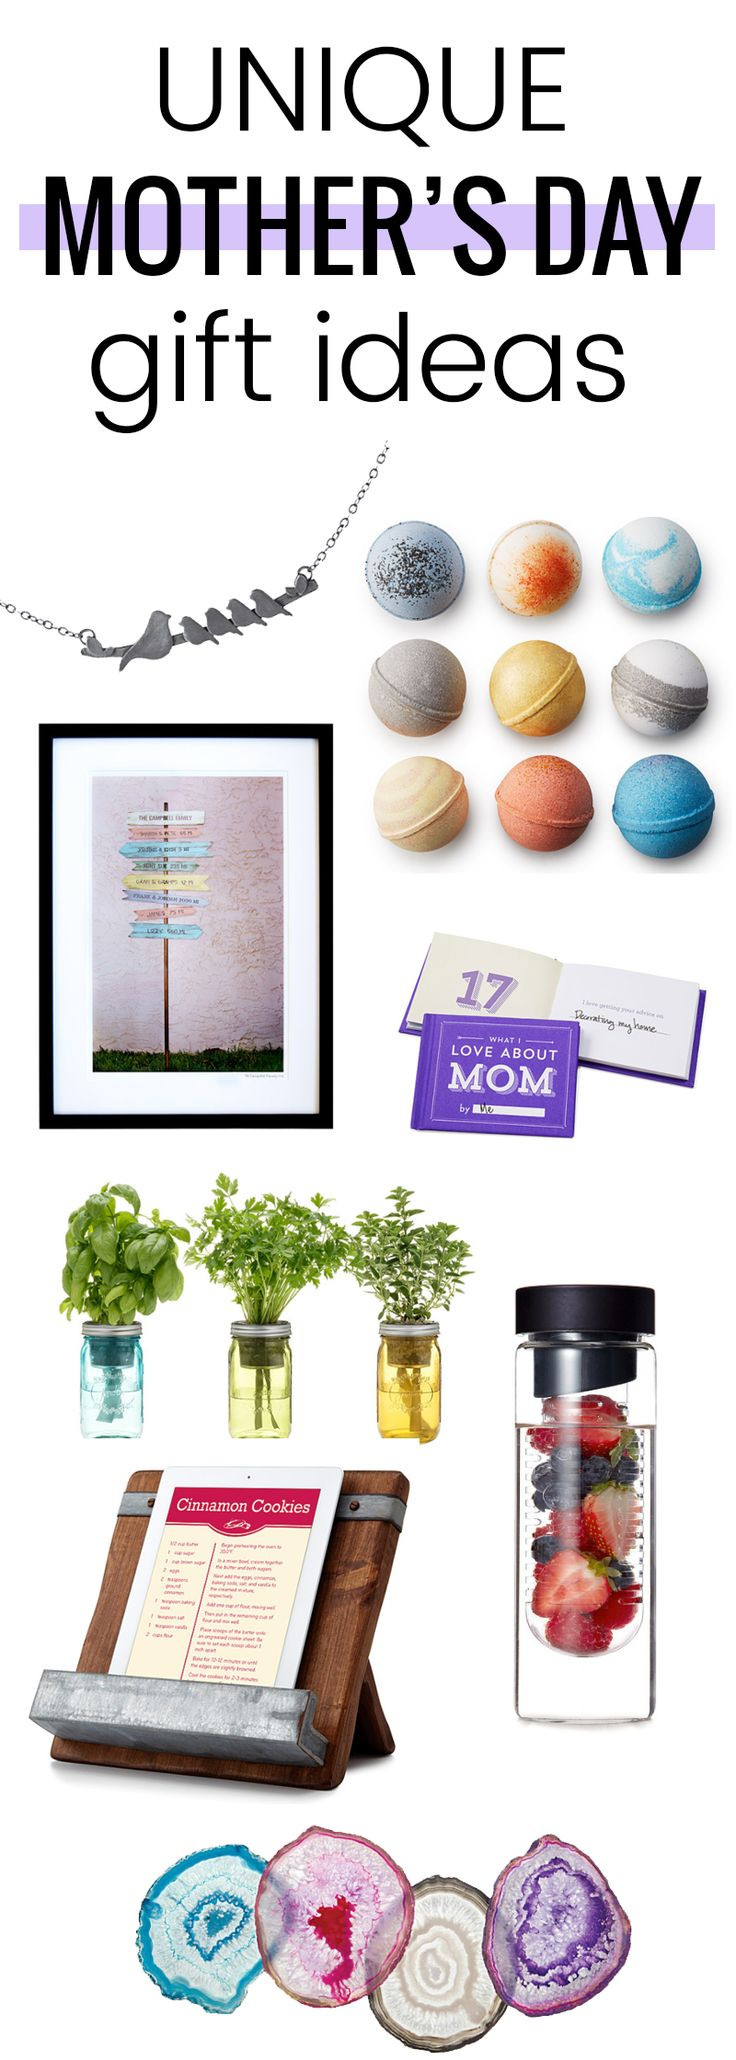 Unique Mother'S Day Gift Ideas
 25 trending Unique Mothers Day Gifts ideas on Pinterest